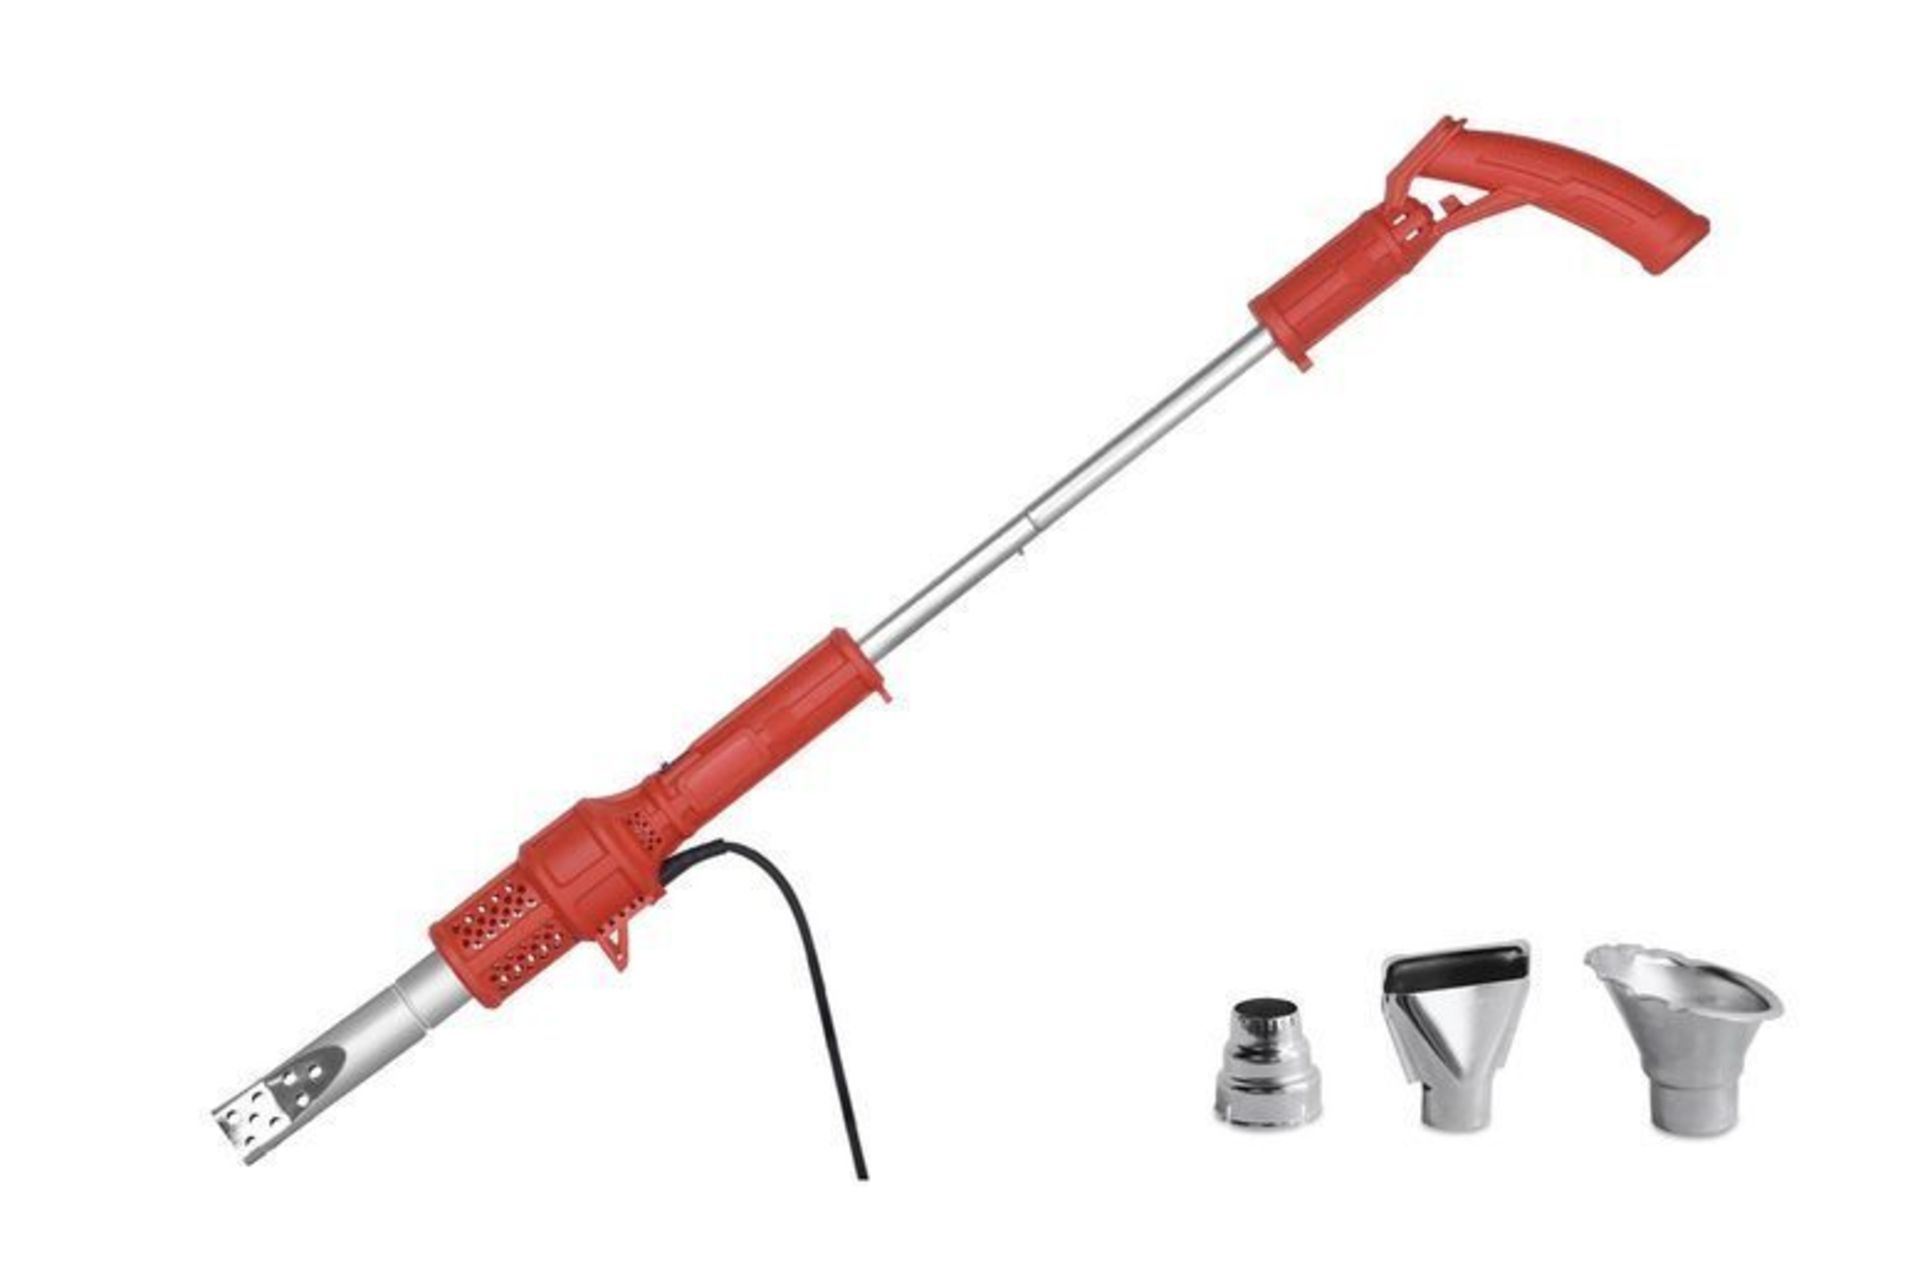 Free Delivery - 2000W Electric Weed Burner Heat Gun & 4 Nozzles - Image 2 of 2